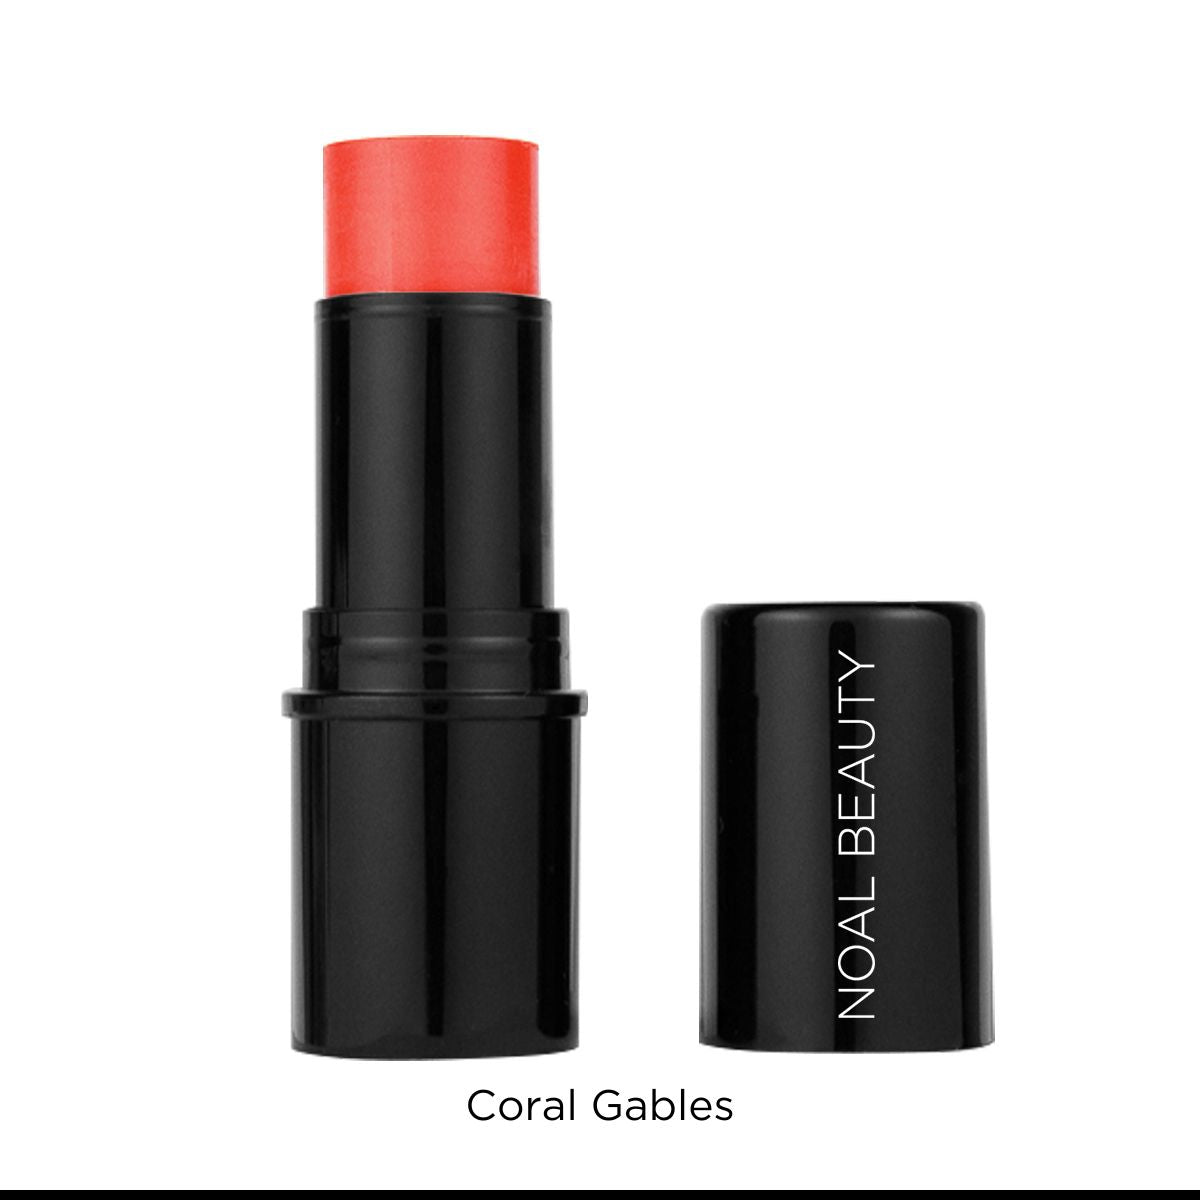 noal-beauty-coral-gables-stick-3-in-1-color-stick-lips-eyes-cheeks-2